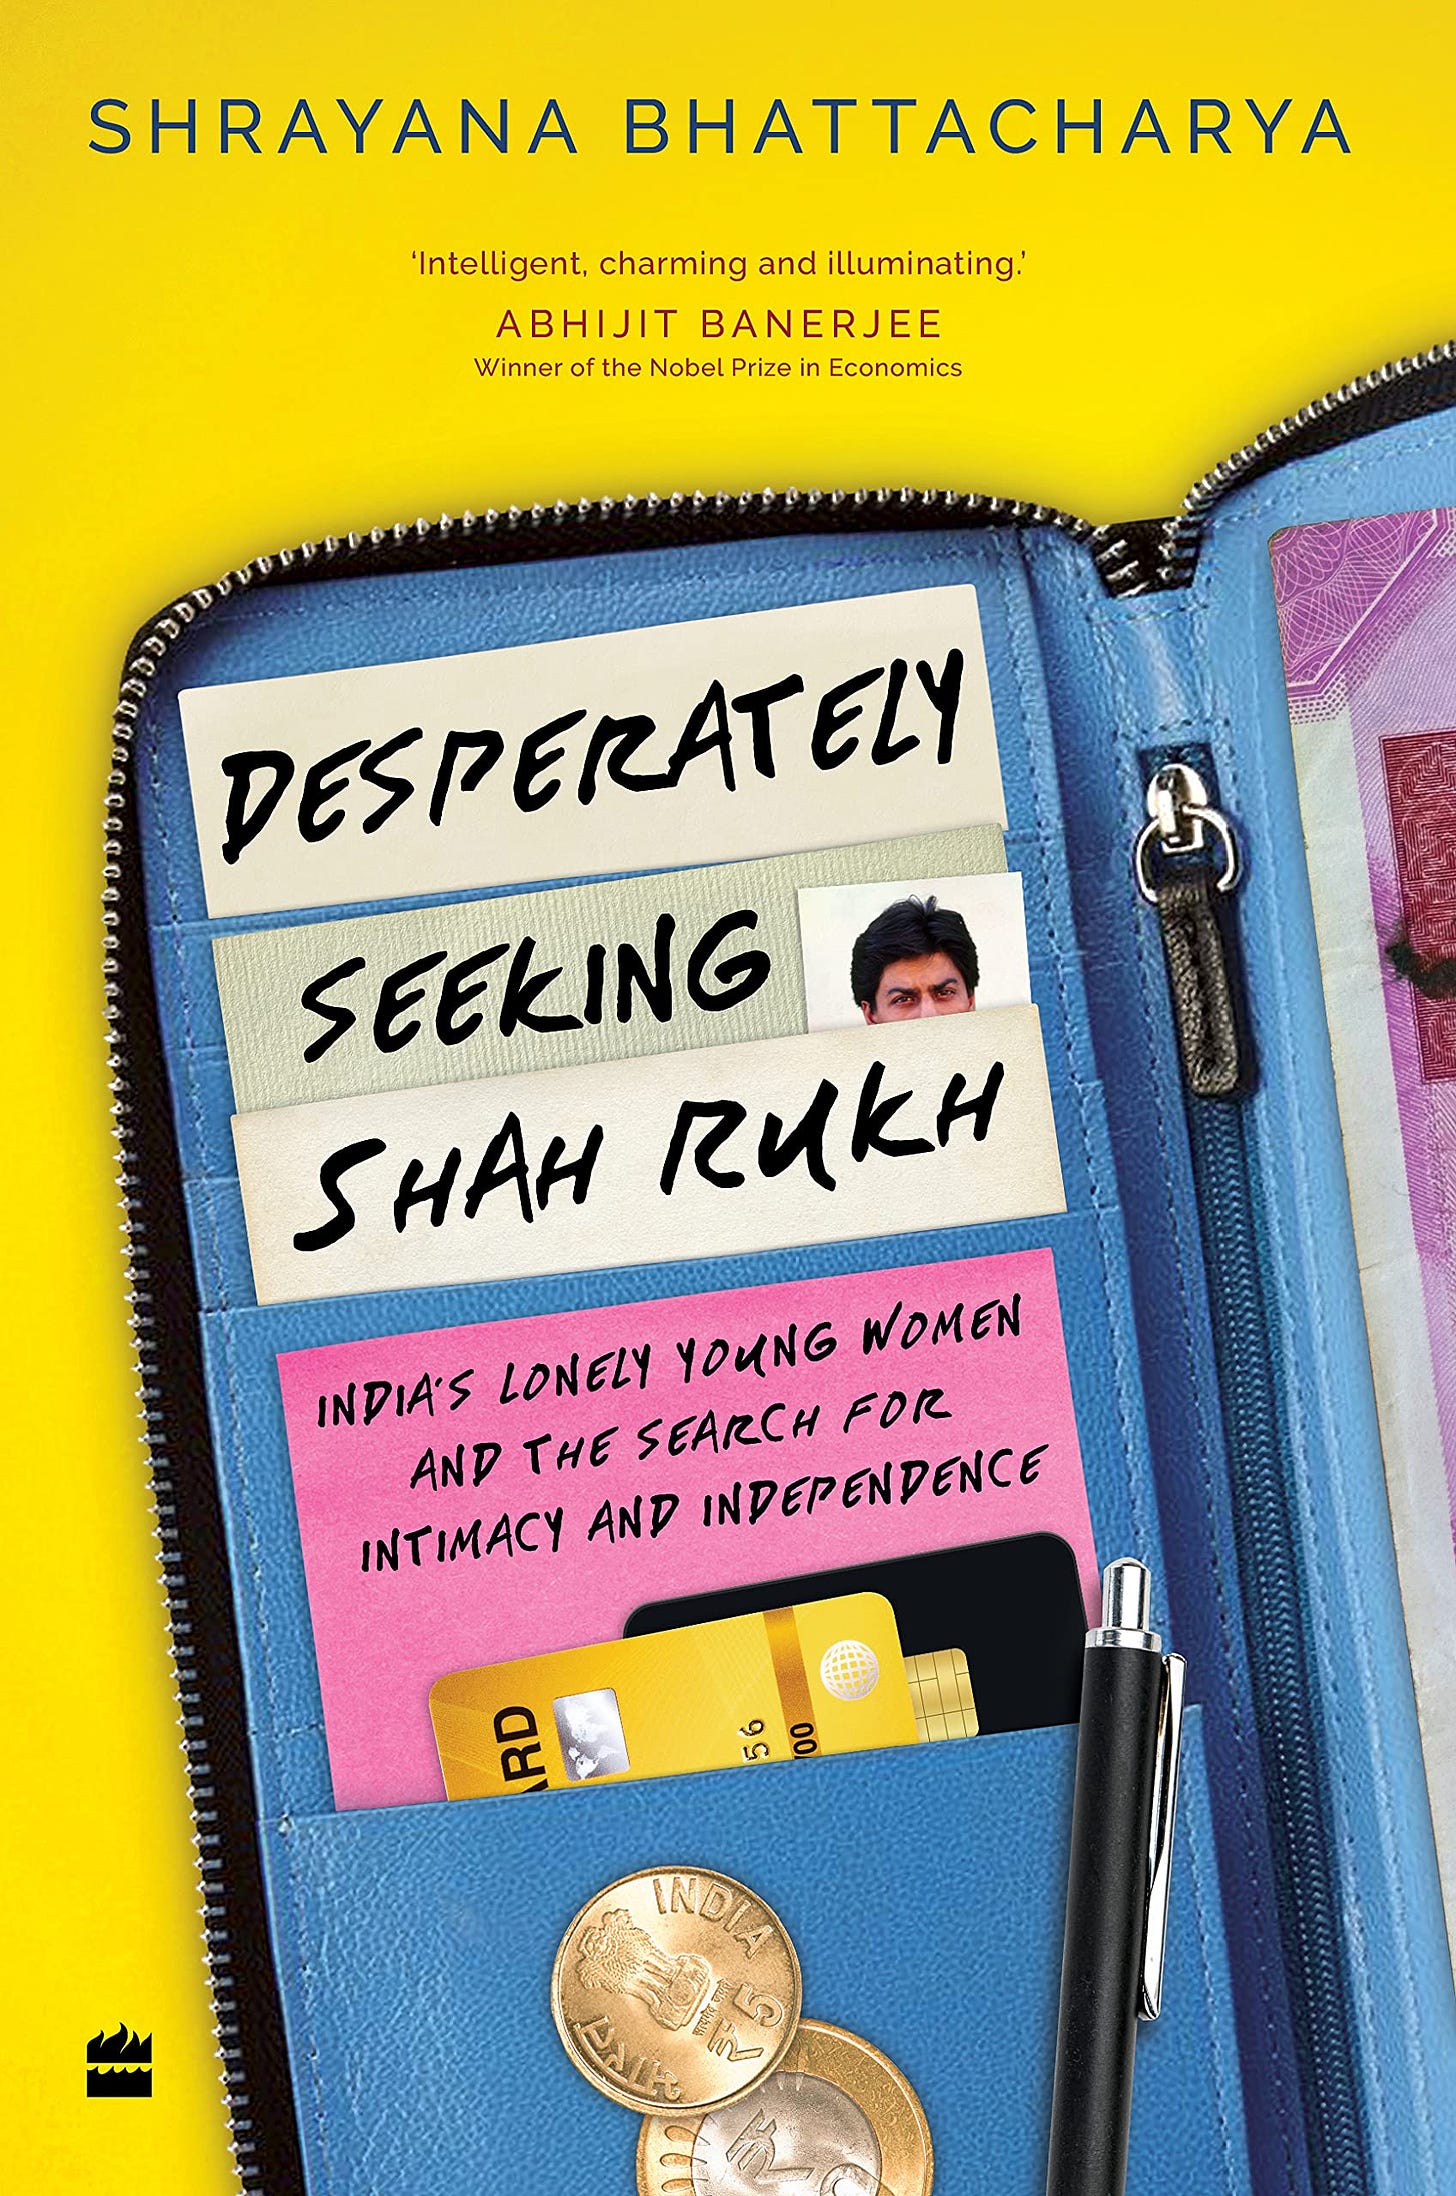 Buy Desperately Seeking Shah Rukh: India's Lonely Young Women and the  Search for Intimacy and Independence Book Online at Low Prices in India | Desperately  Seeking Shah Rukh: India's Lonely Young Women